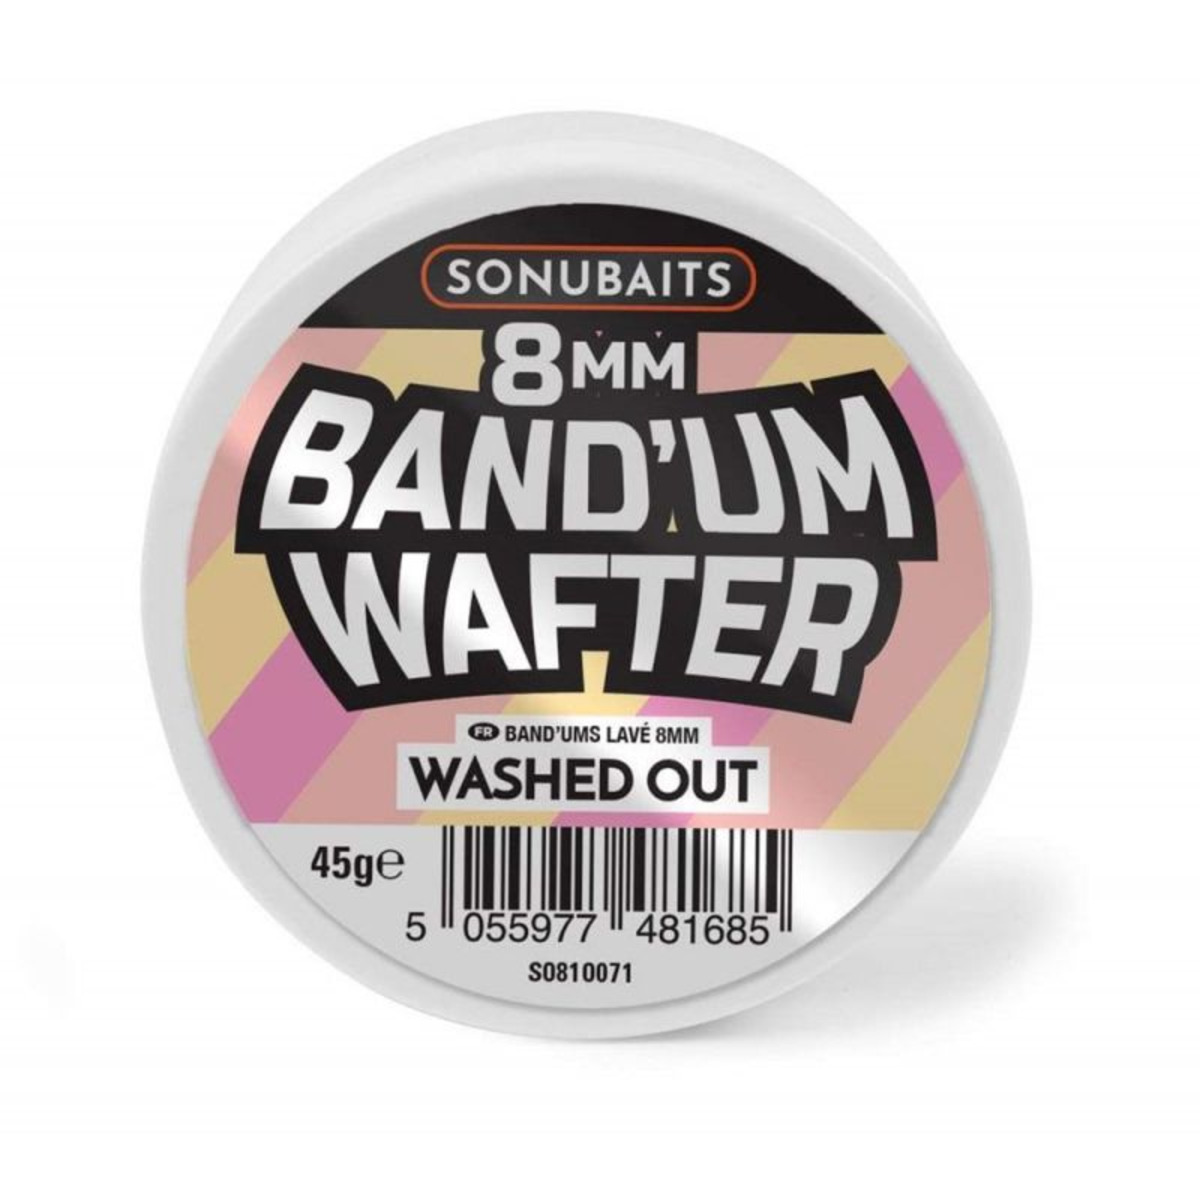 Sonubaits Band’um Wafters - 8 mm - Washed Out